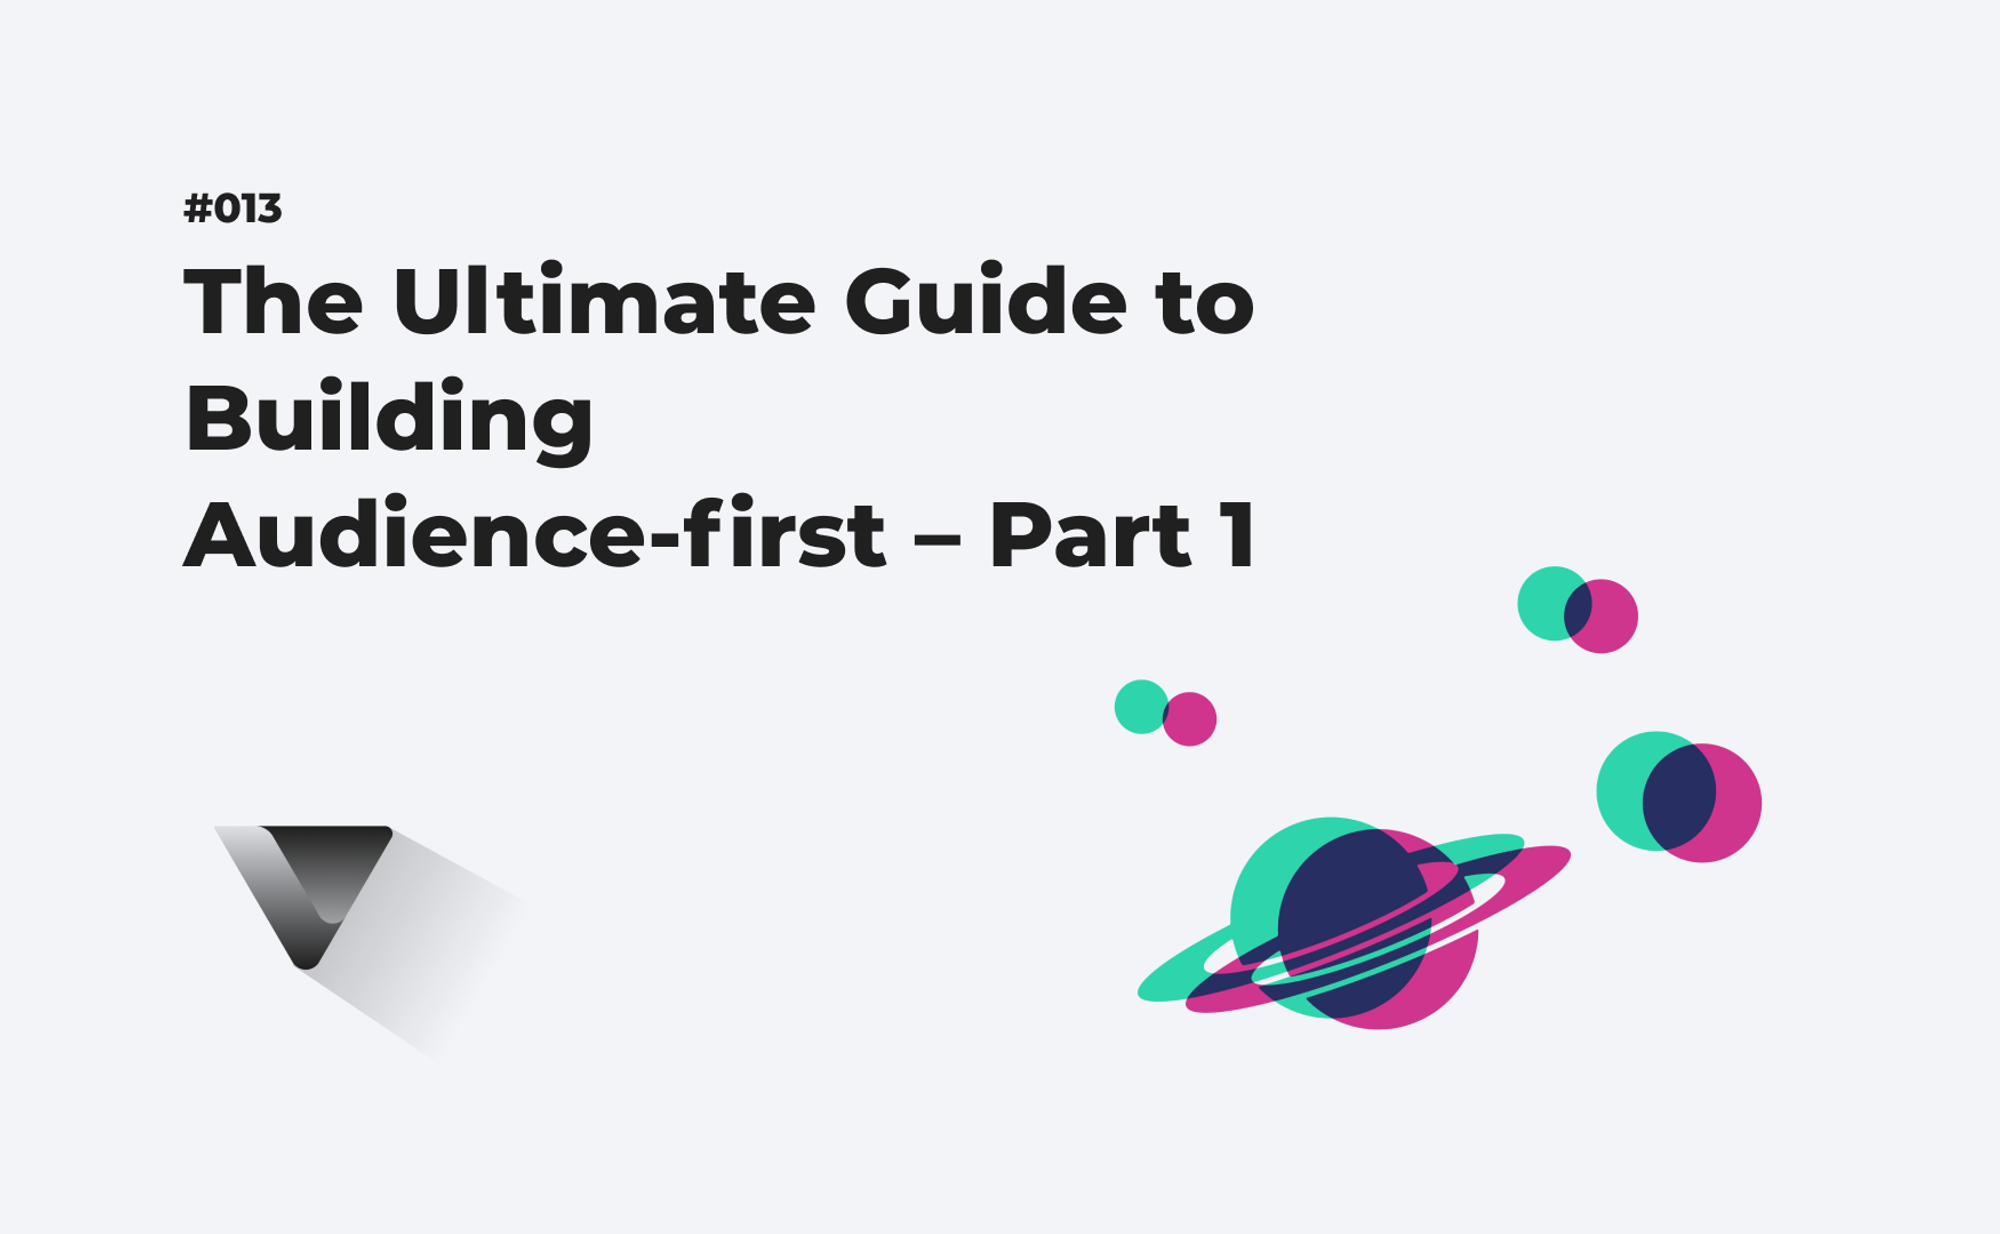 The Ultimate Guide to Building Audience-first – Part 1